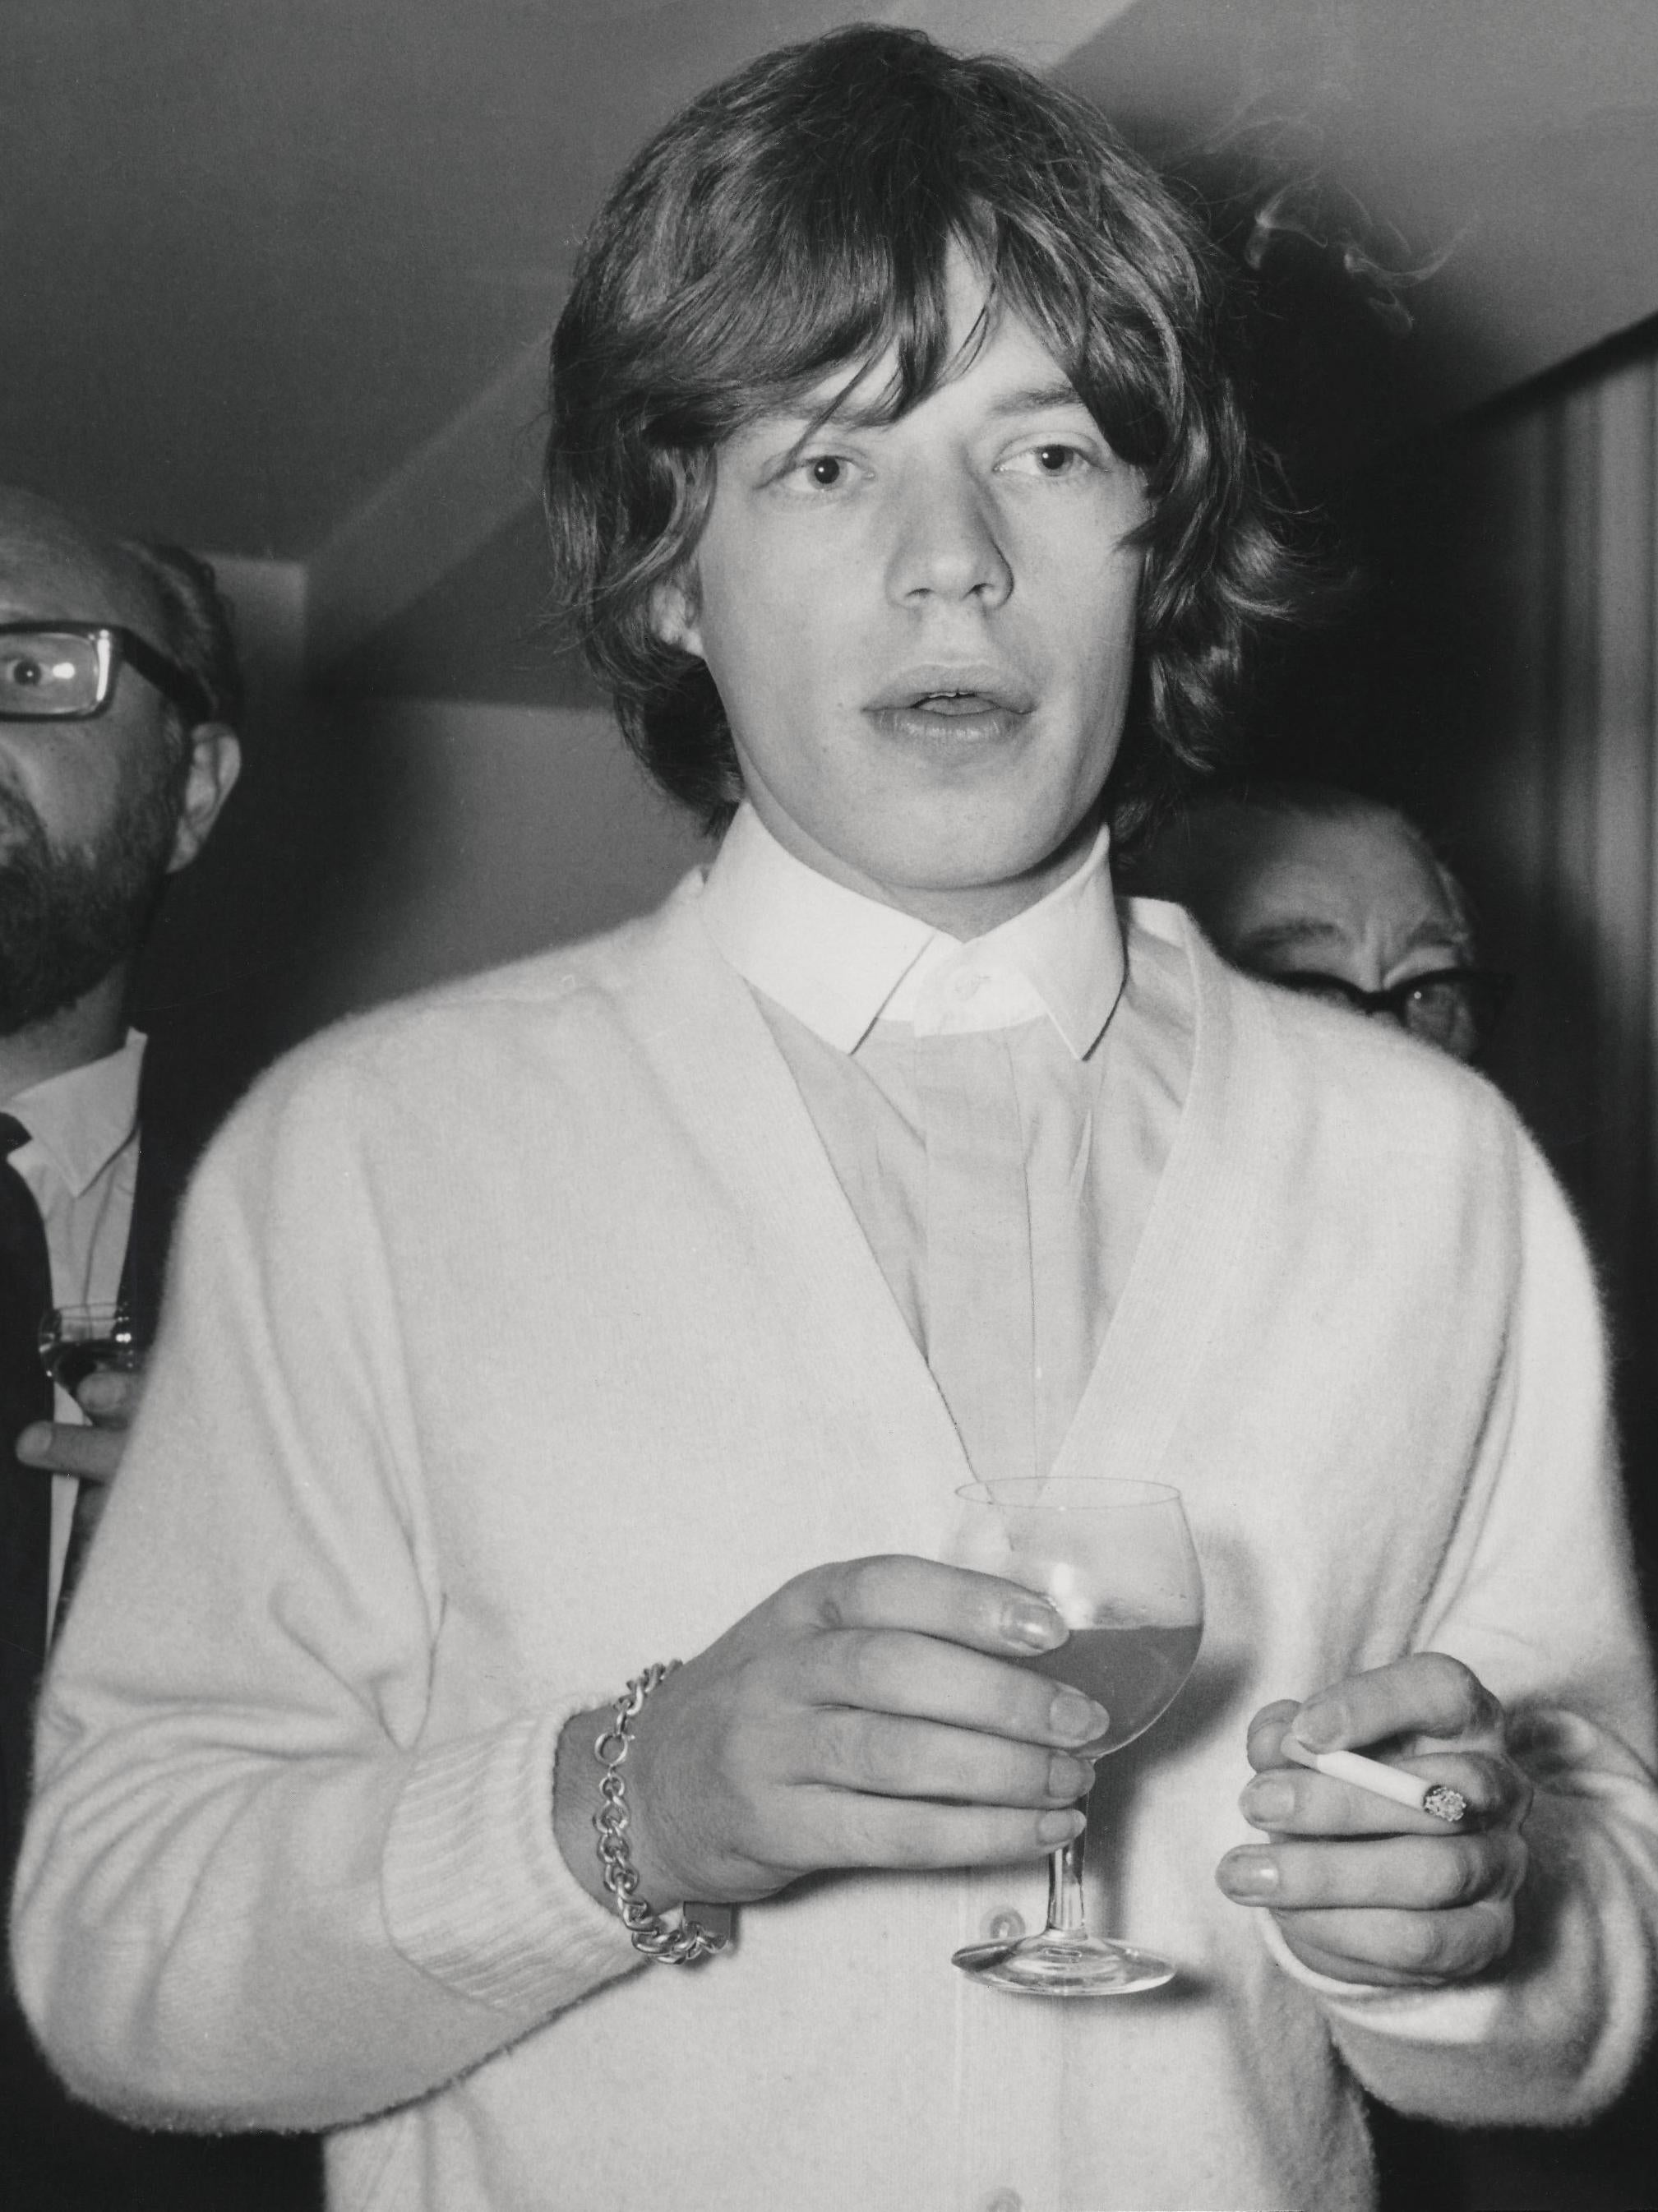 Unknown Portrait Photograph - Mick Jagger Candid at a Party Globe Photos Fine Art Print